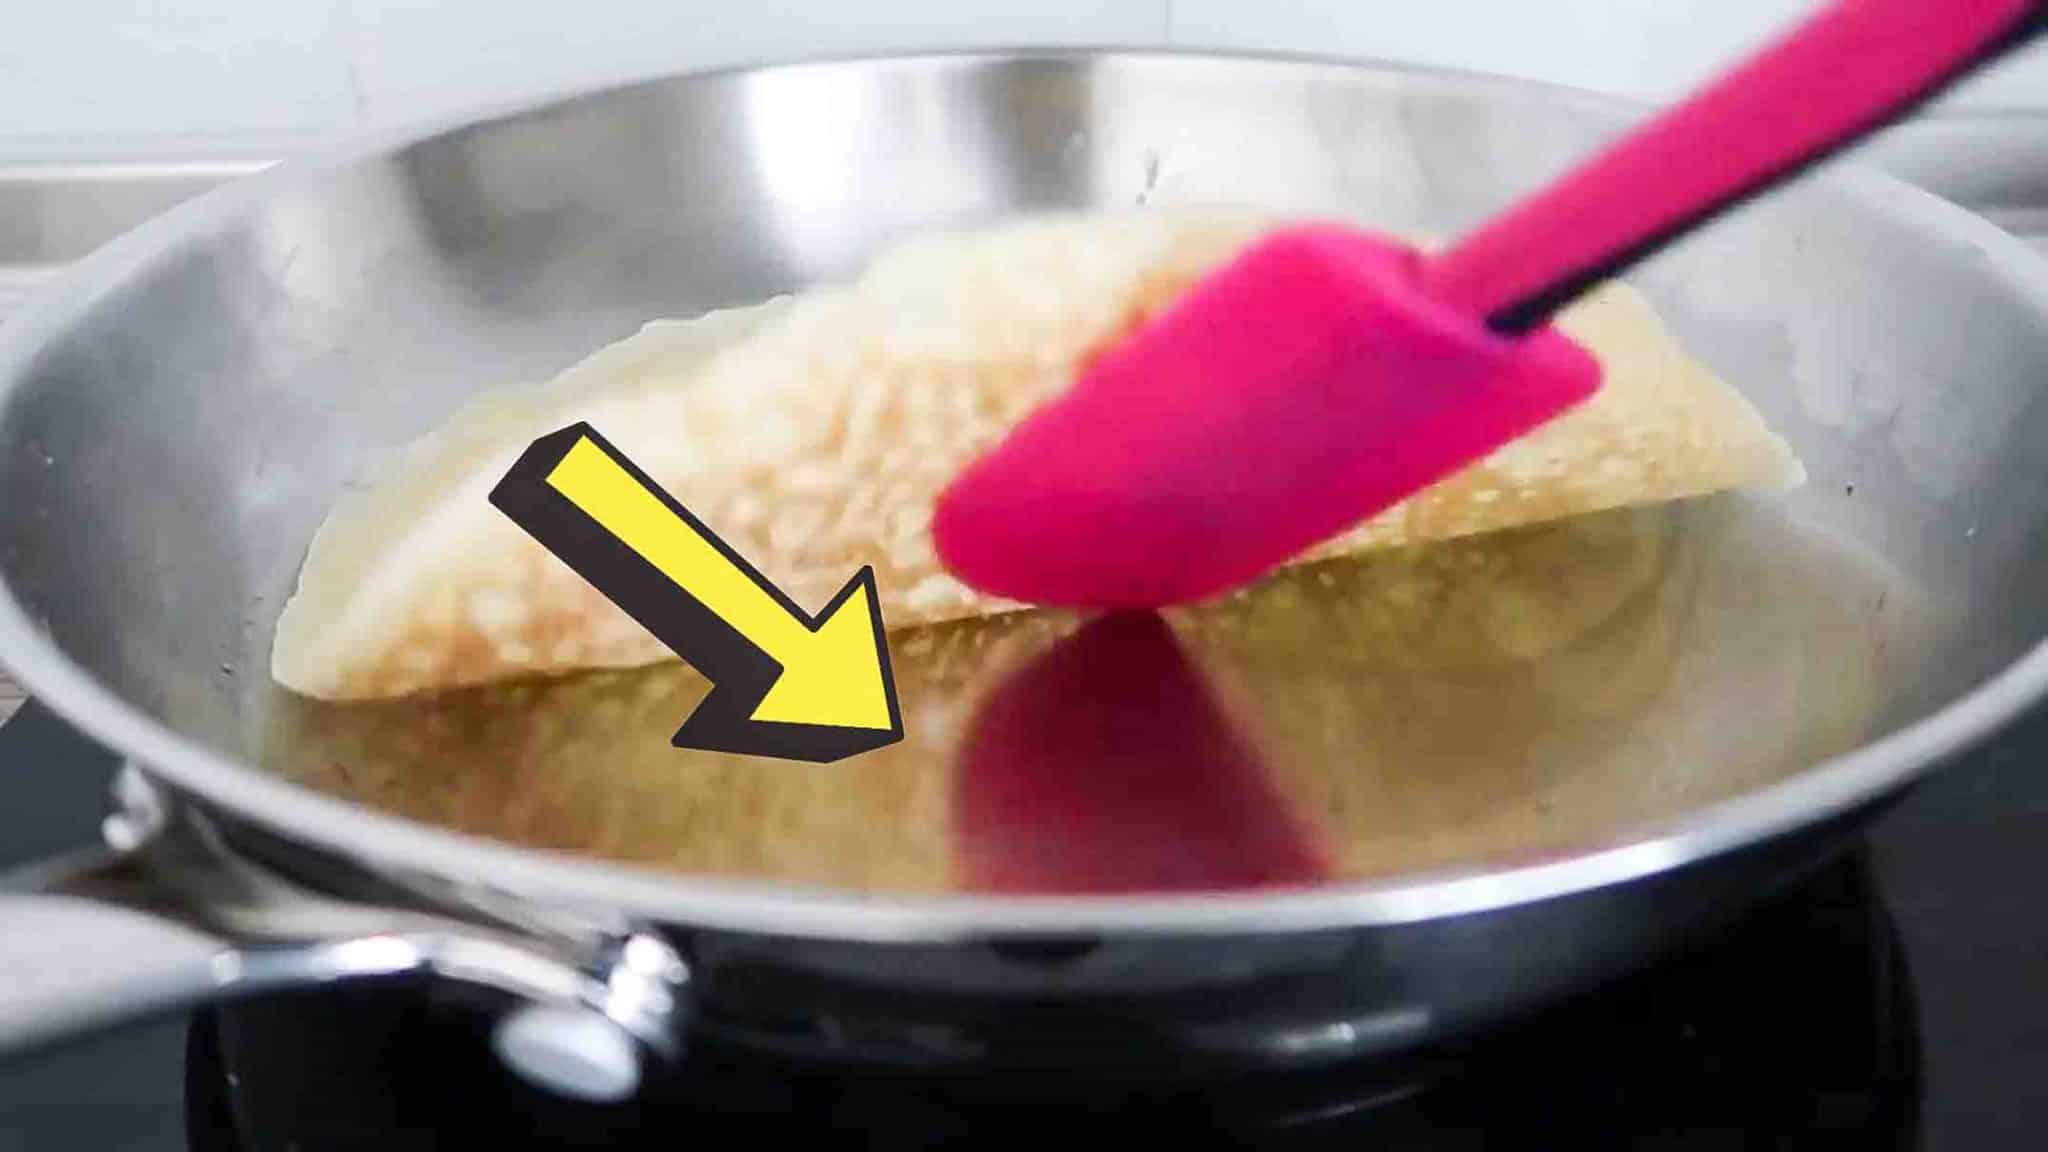 A Simple Trick for Using Your Stainless Steel Pan Like a Nonstick